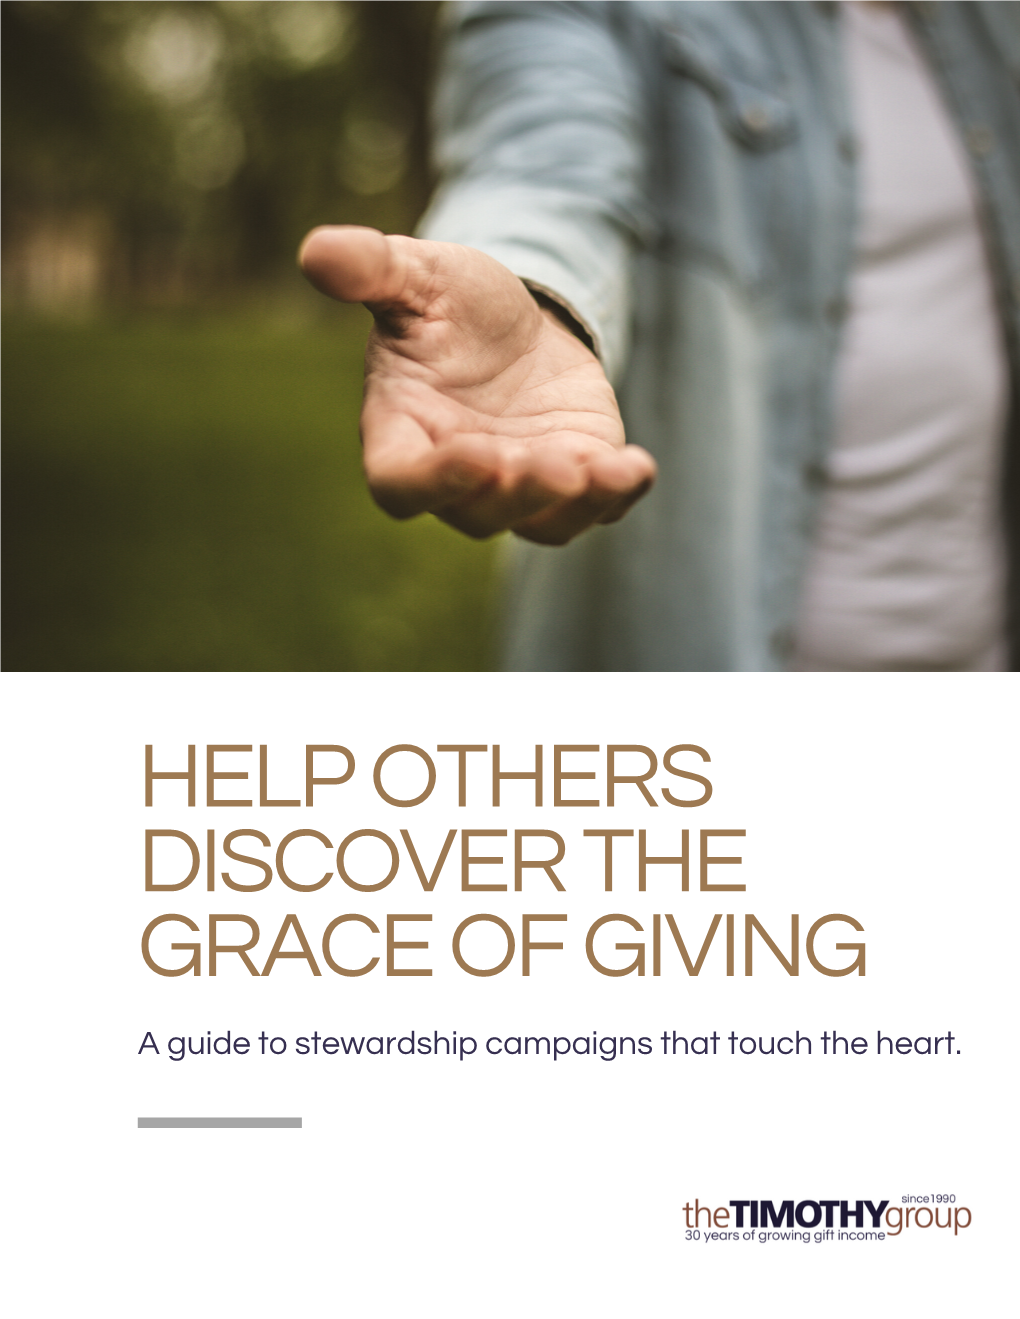 HELP OTHERS DISCOVER the GRACE of GIVING a Guide to Stewardship Campaigns That Touch the Heart